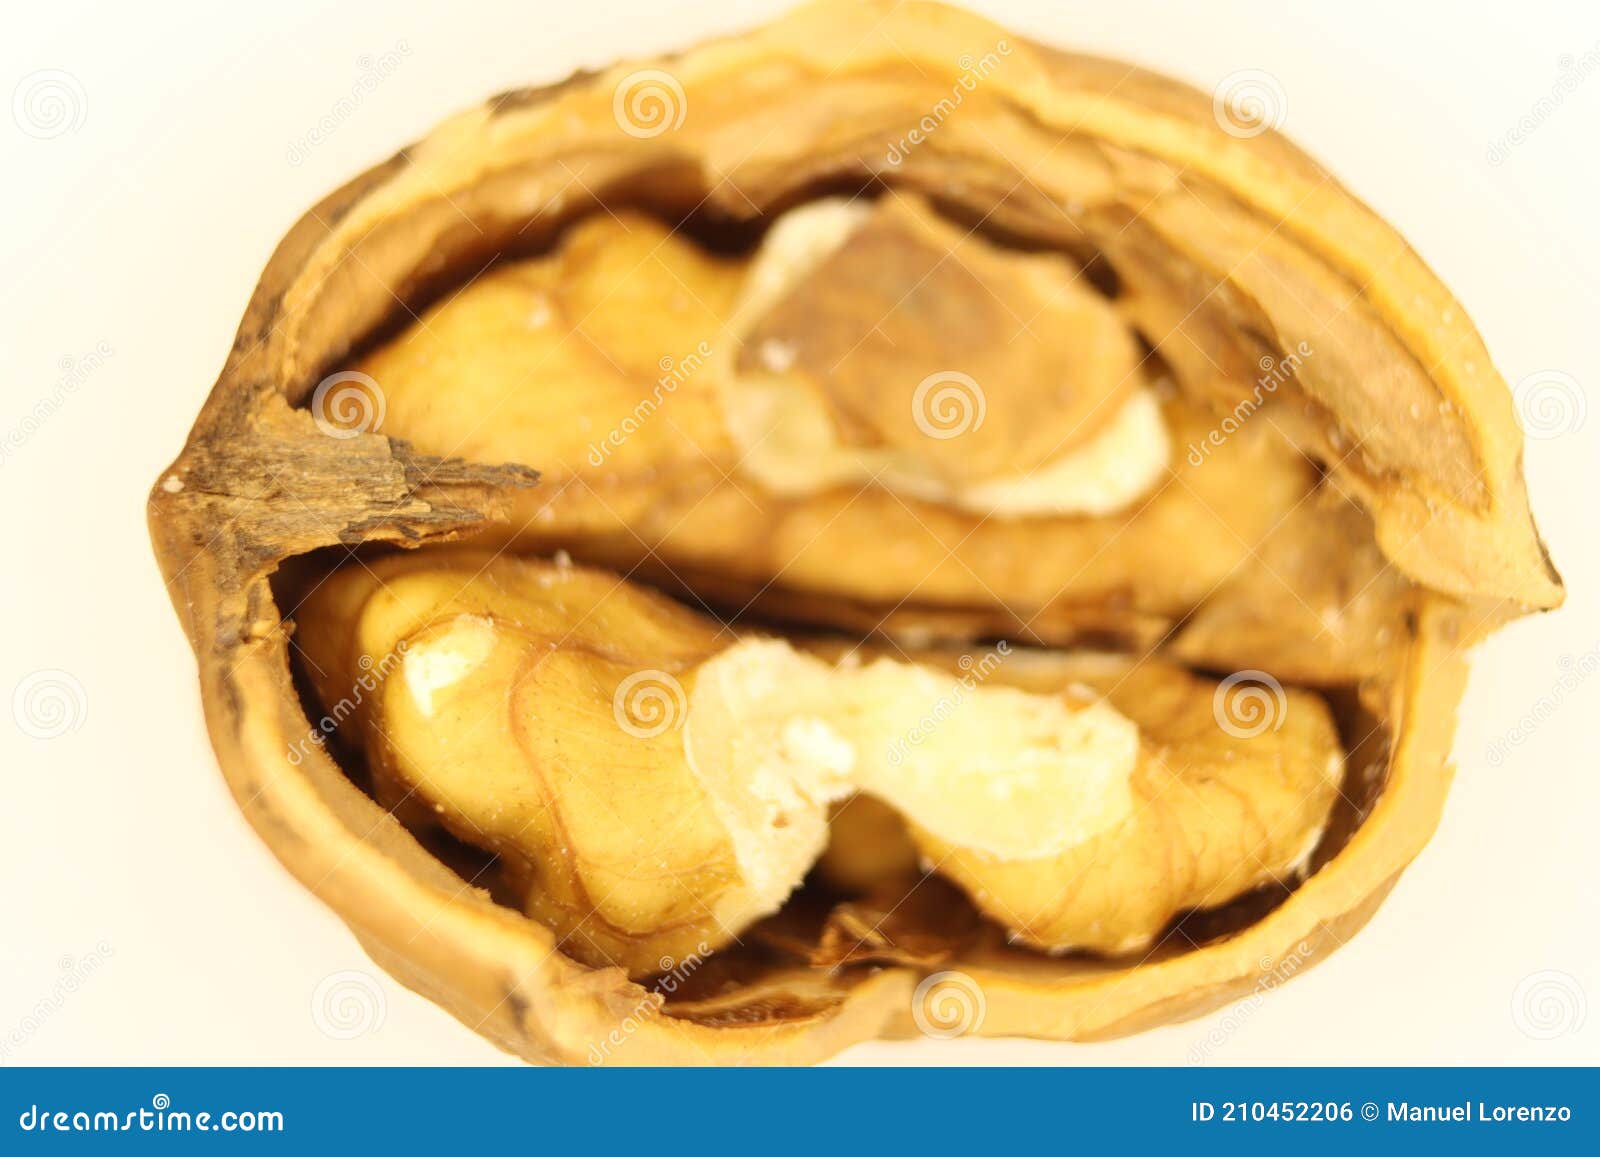 nut seed healthy natural food healthy shell